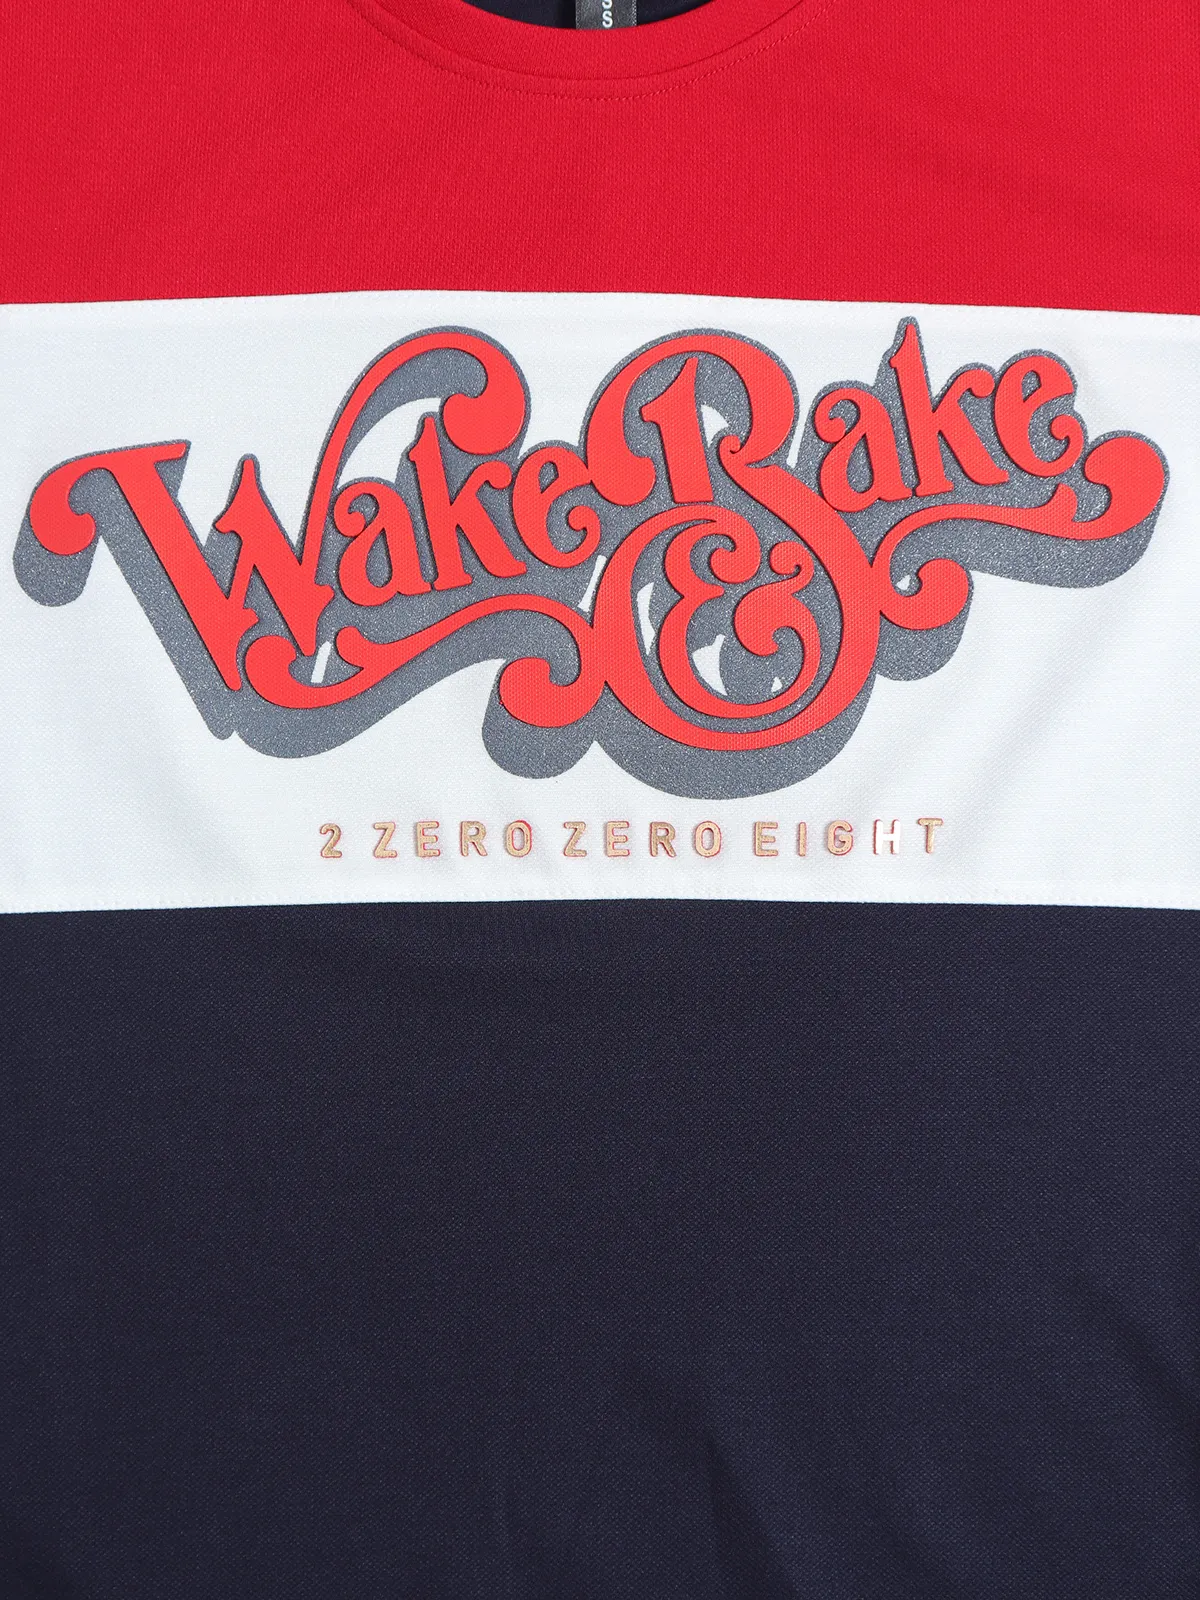 Cookyss navy and red printed cotton t shirt